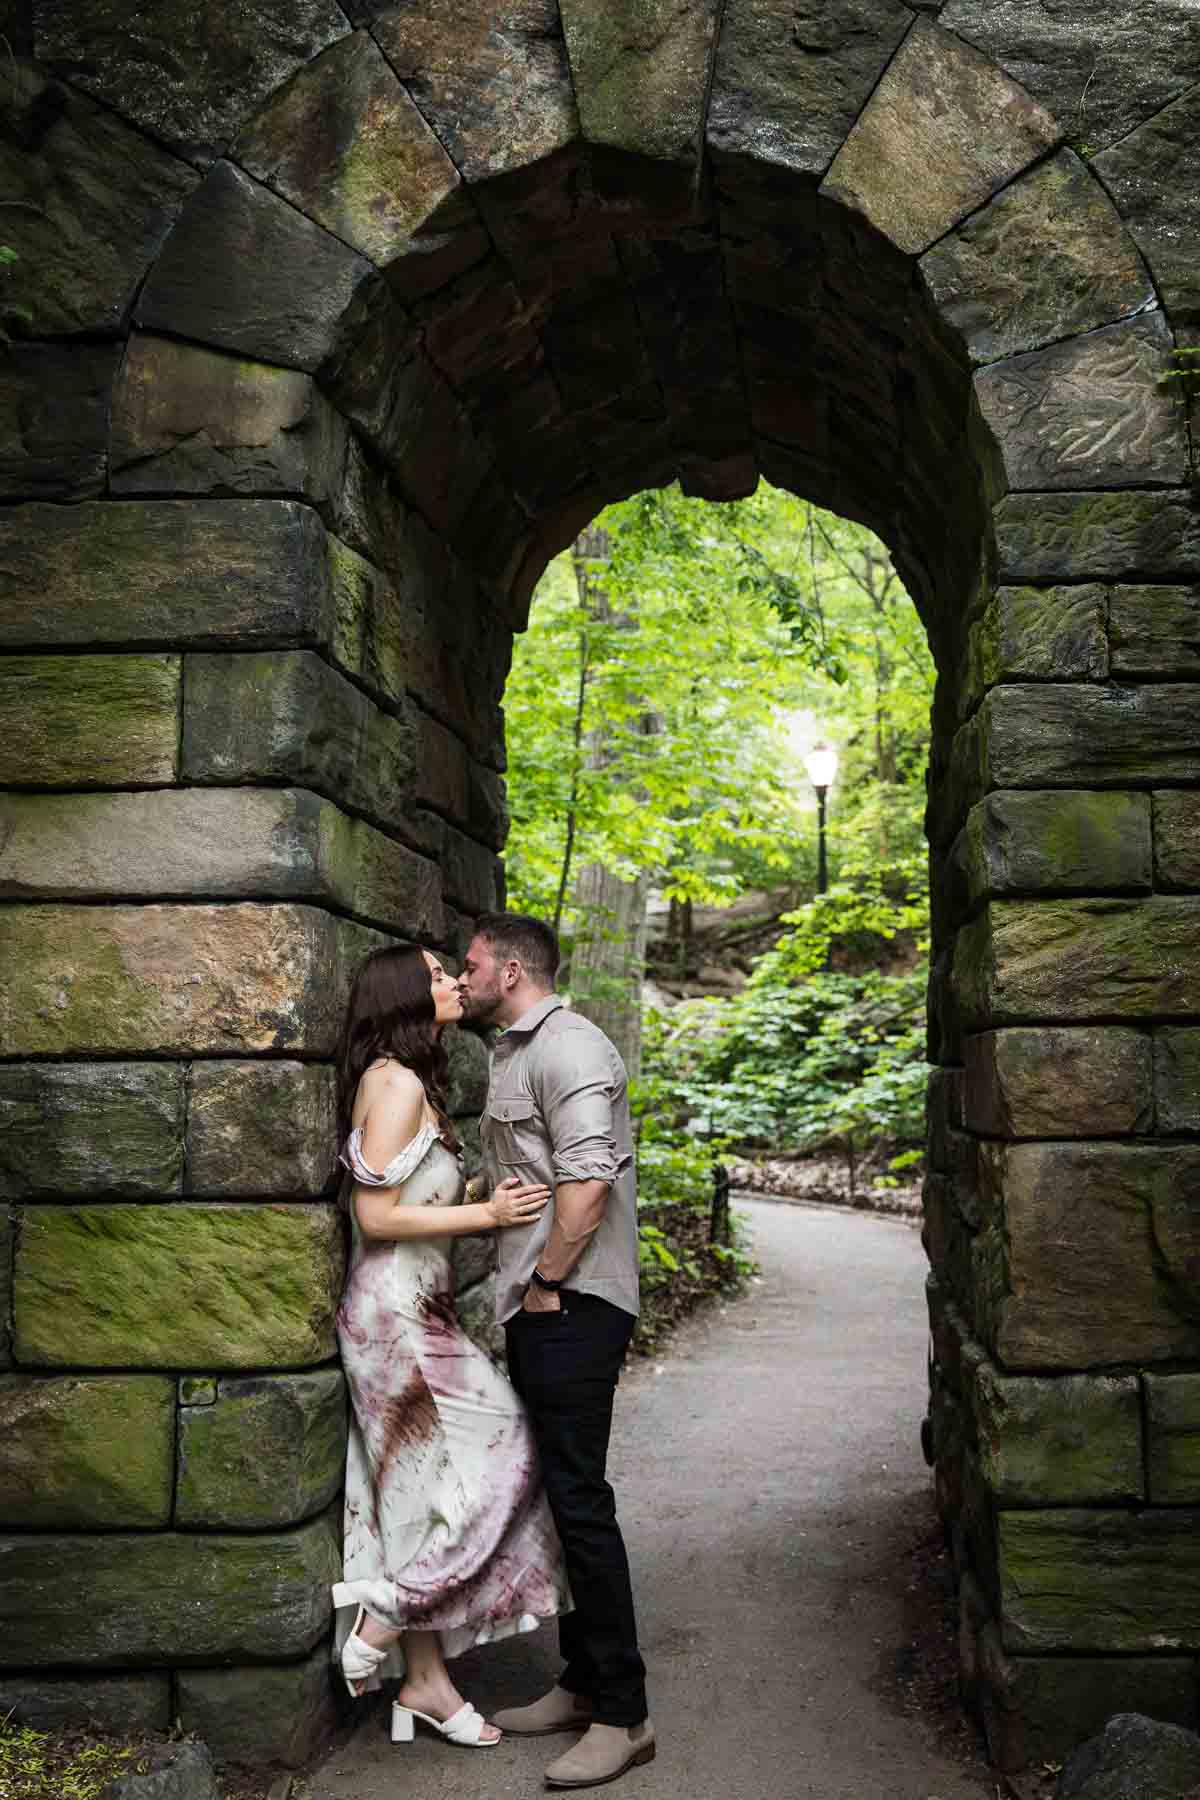 Couple kissing in stone archway for an article on the best places to propose in Central Park